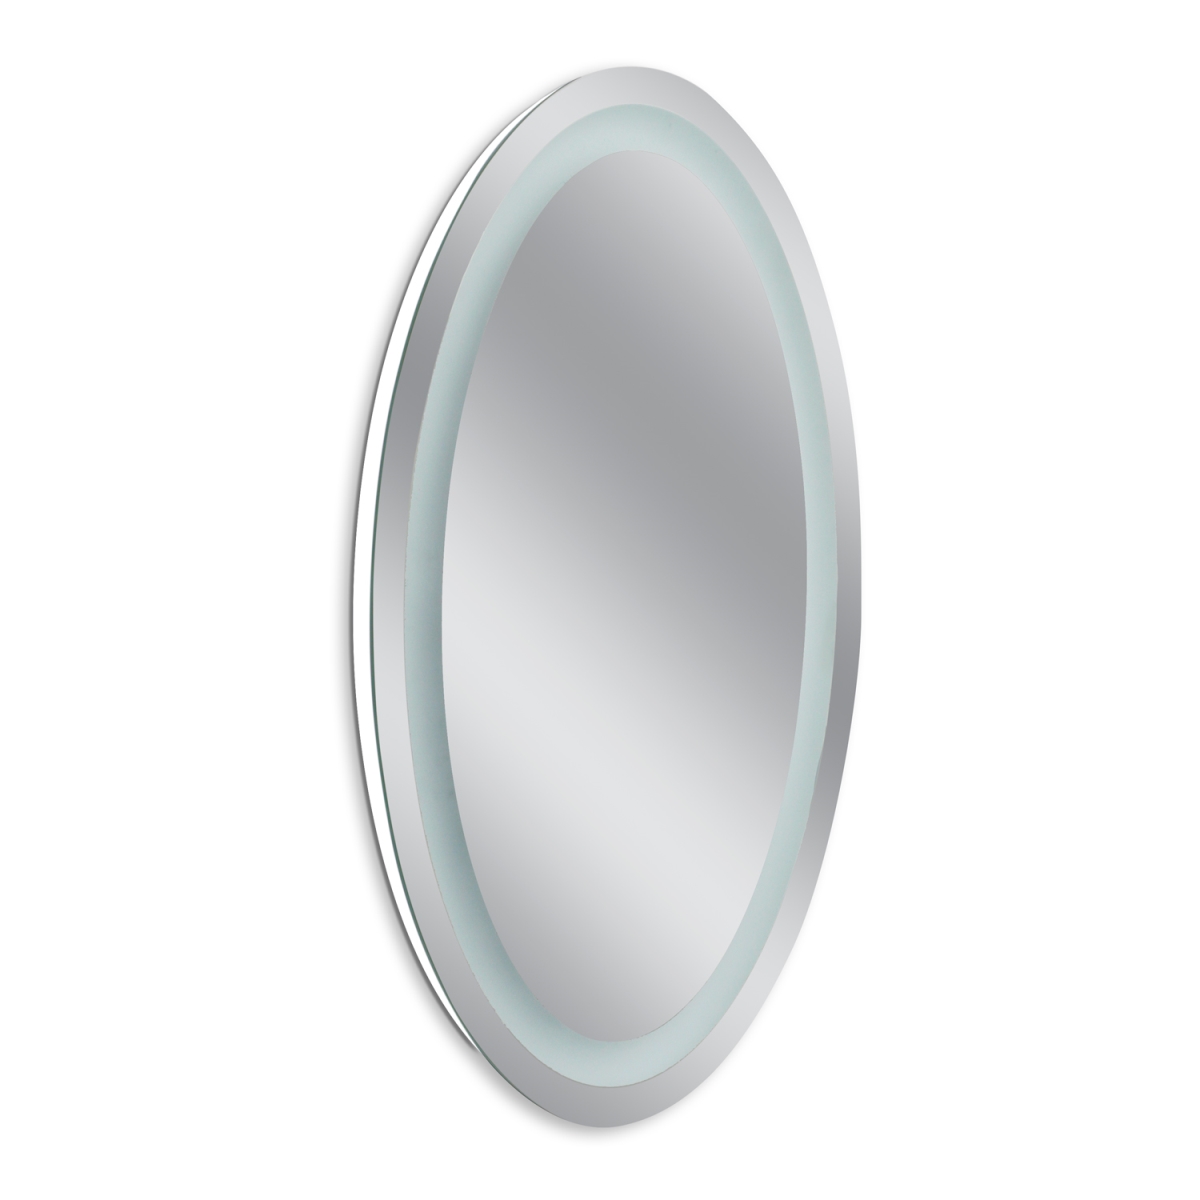 8104 21 X 31 In. Led Wall Mirror - Oval